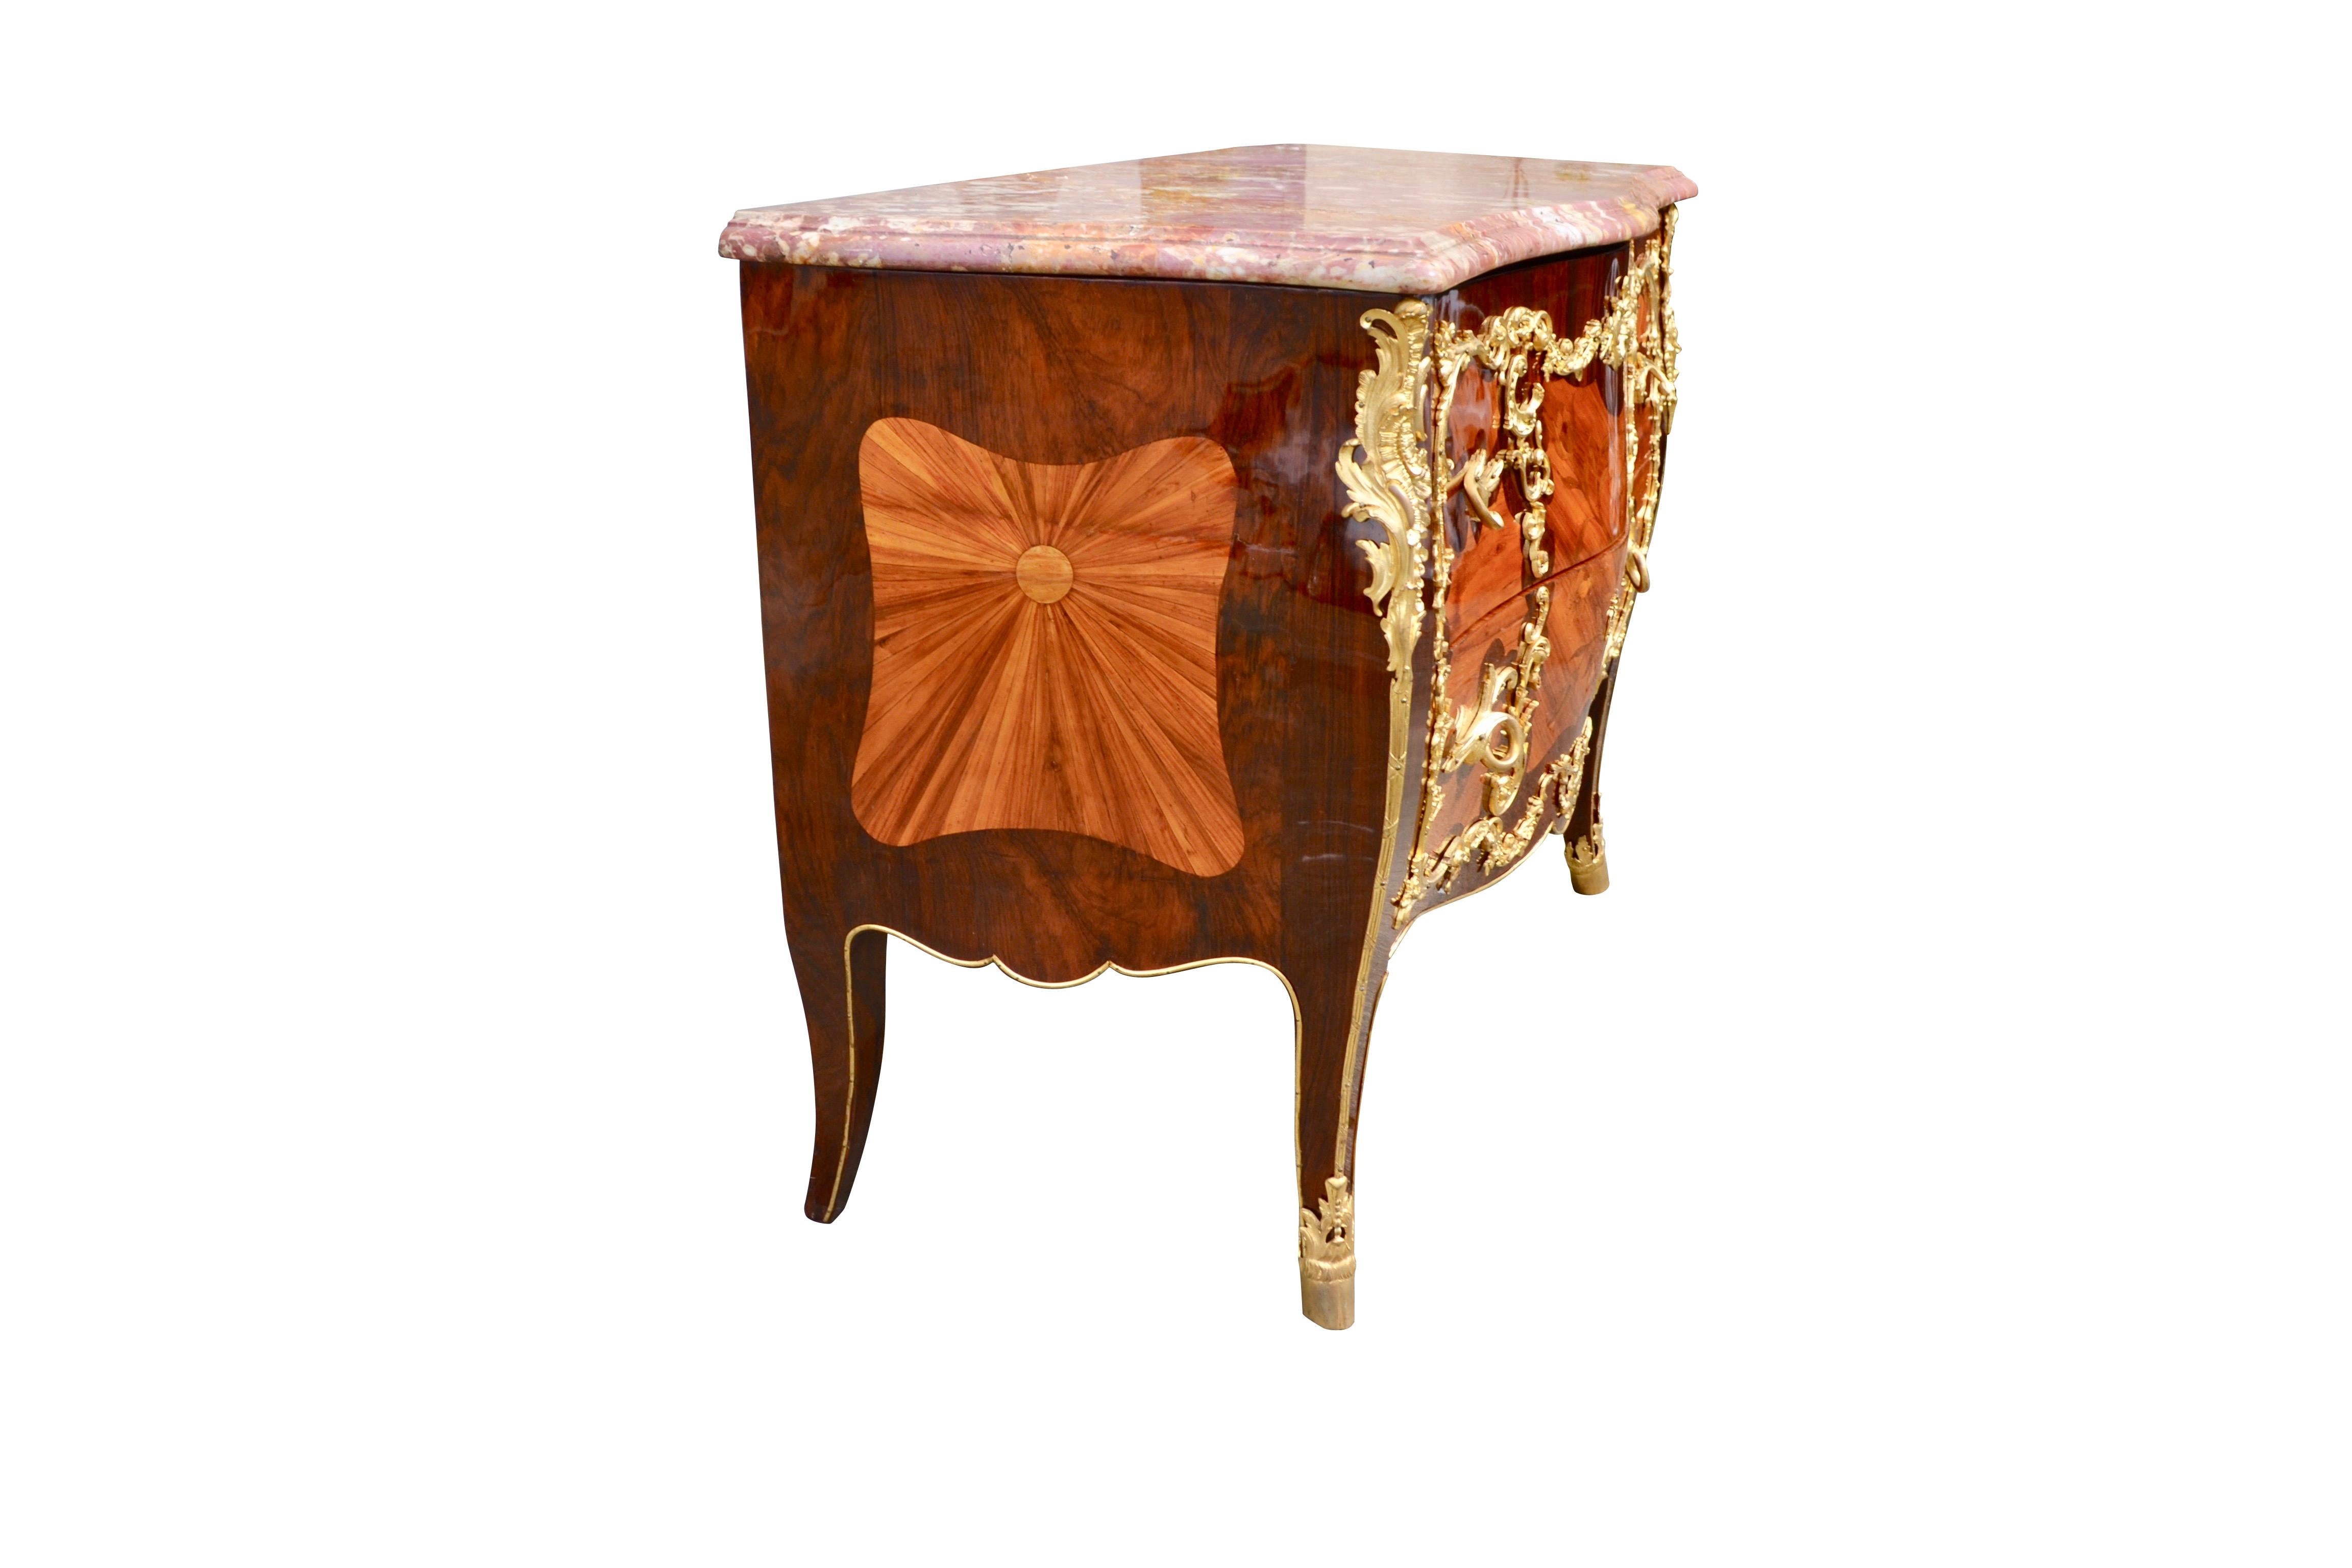 19th Century French Louis XV Style Marquetry and Ormolu Bombe Chest of Drawers For Sale 5